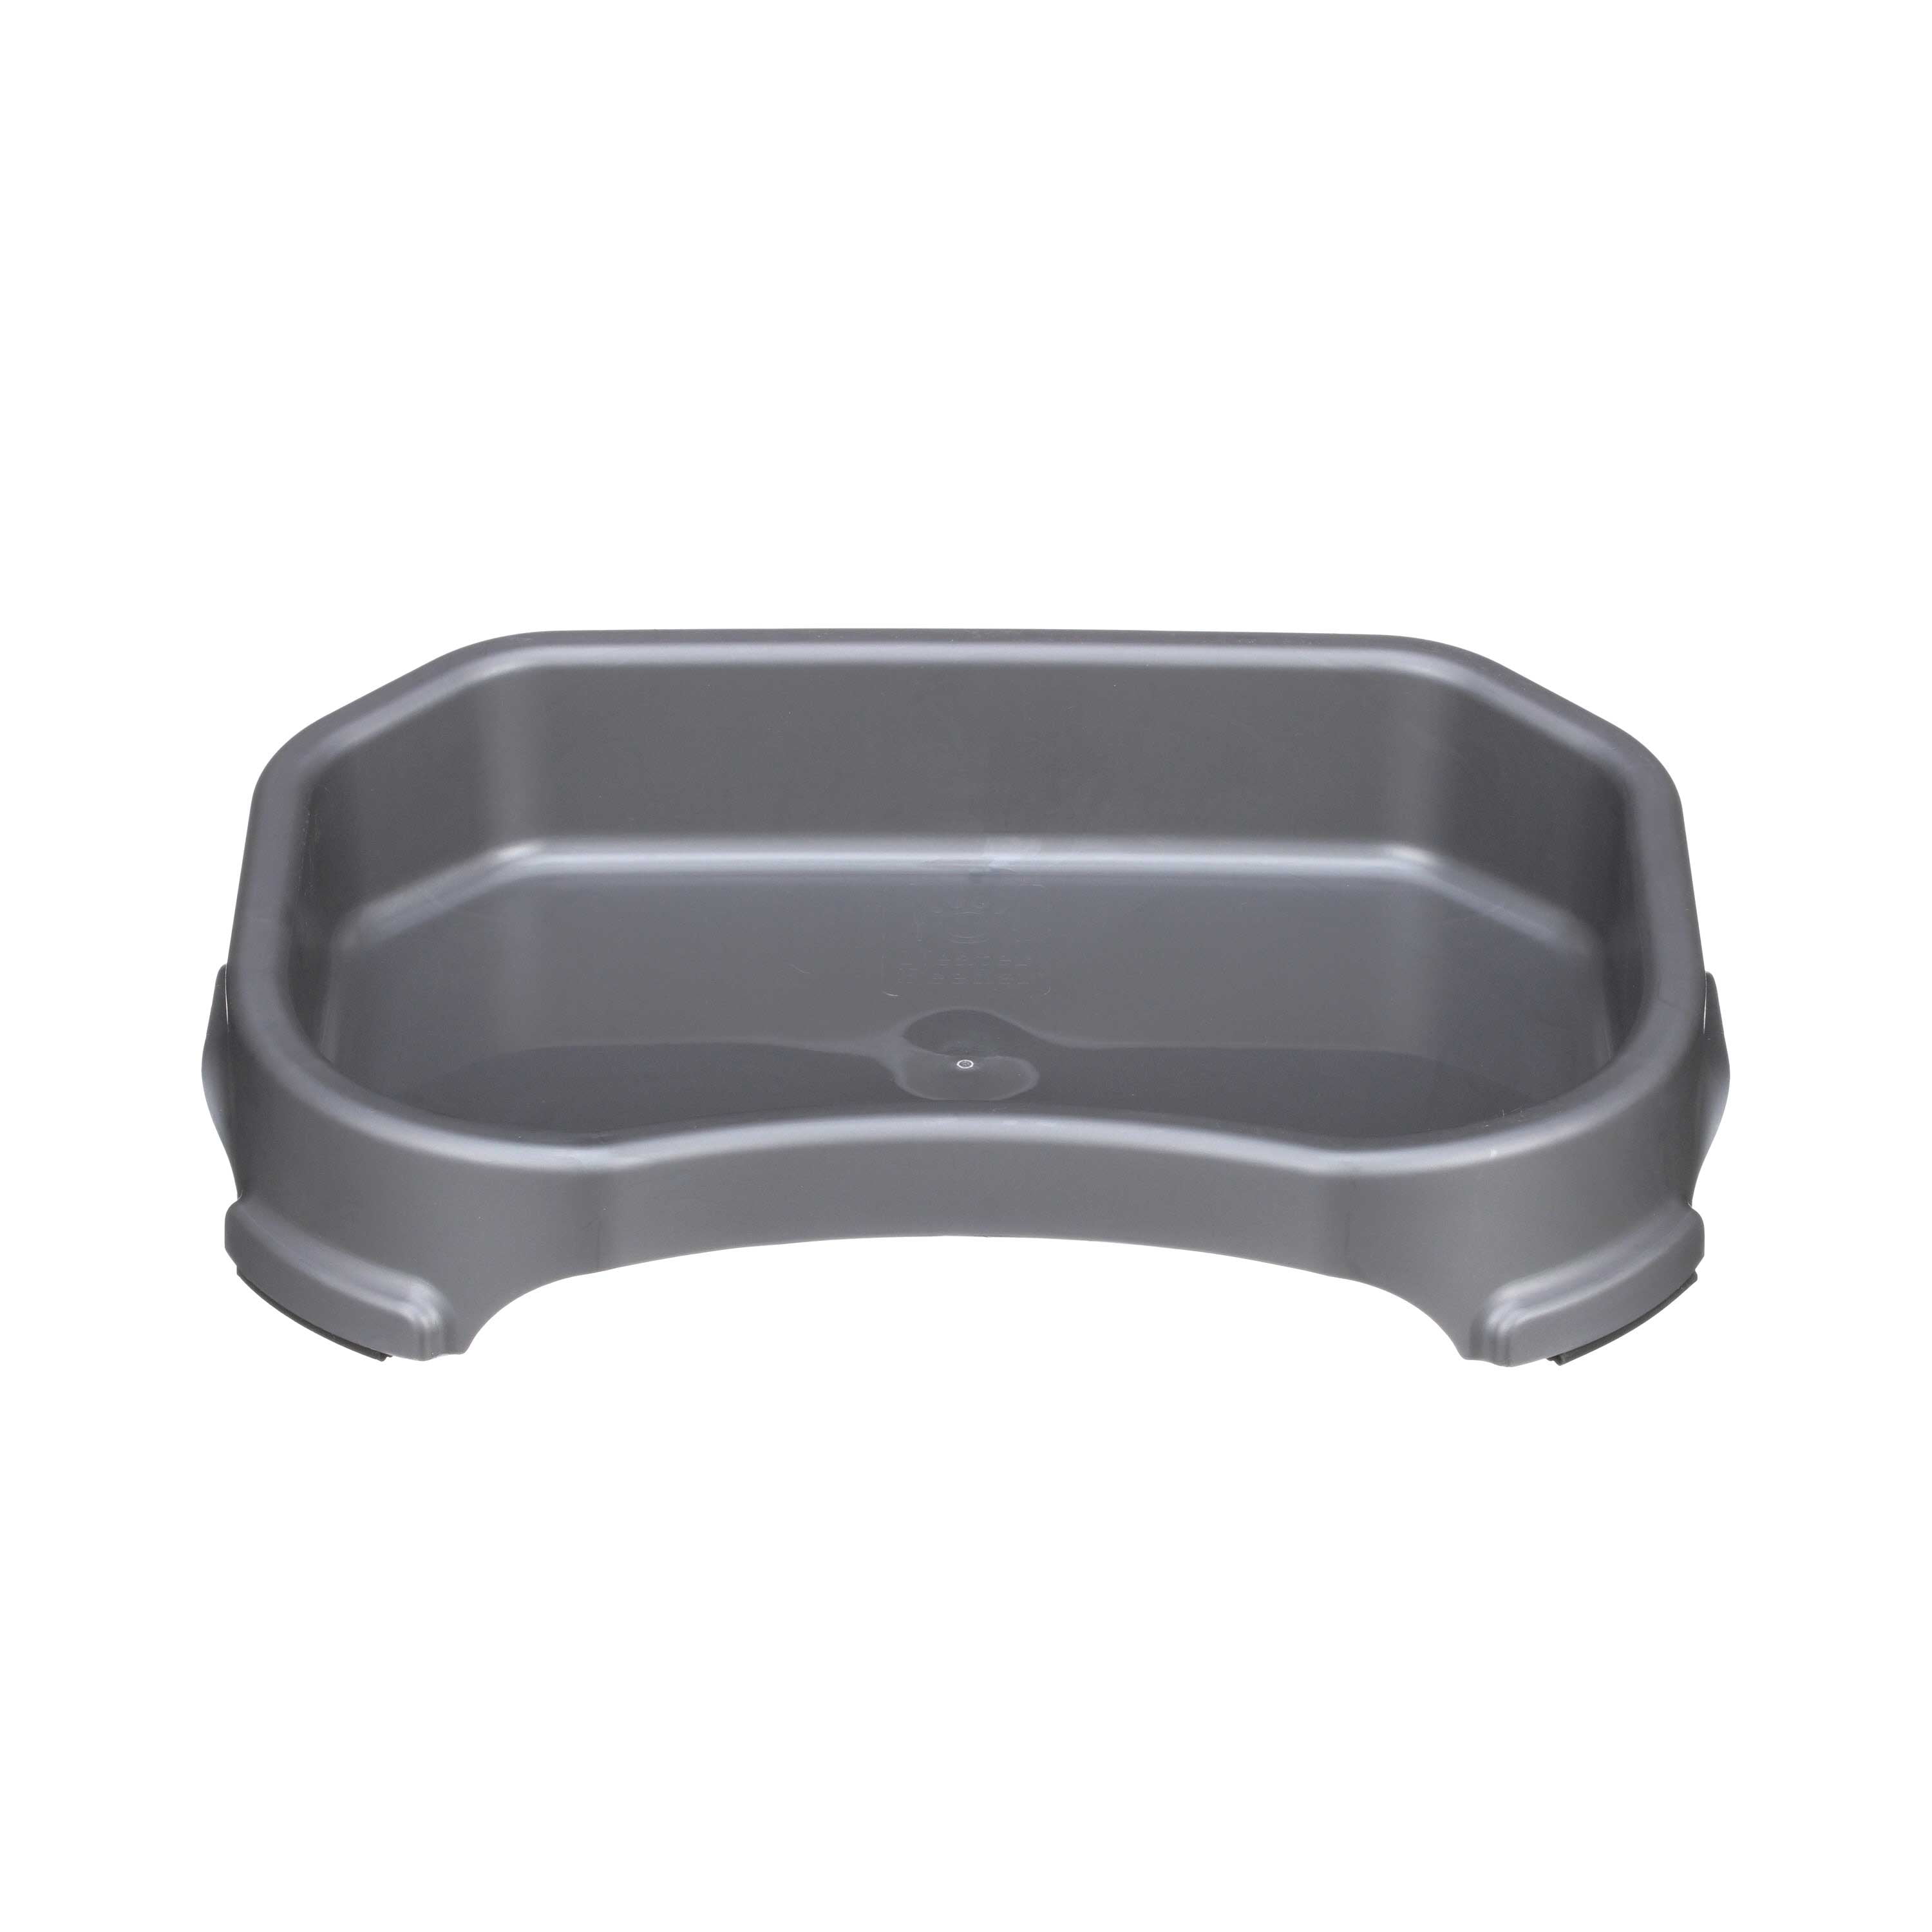 Neater Pet Brands Big Bowl Extra Large Water Bowl for Dogs (1.25 Gallon Capacity, 160 oz) Huge Over Size Pet Bowl Gunmetal Grey